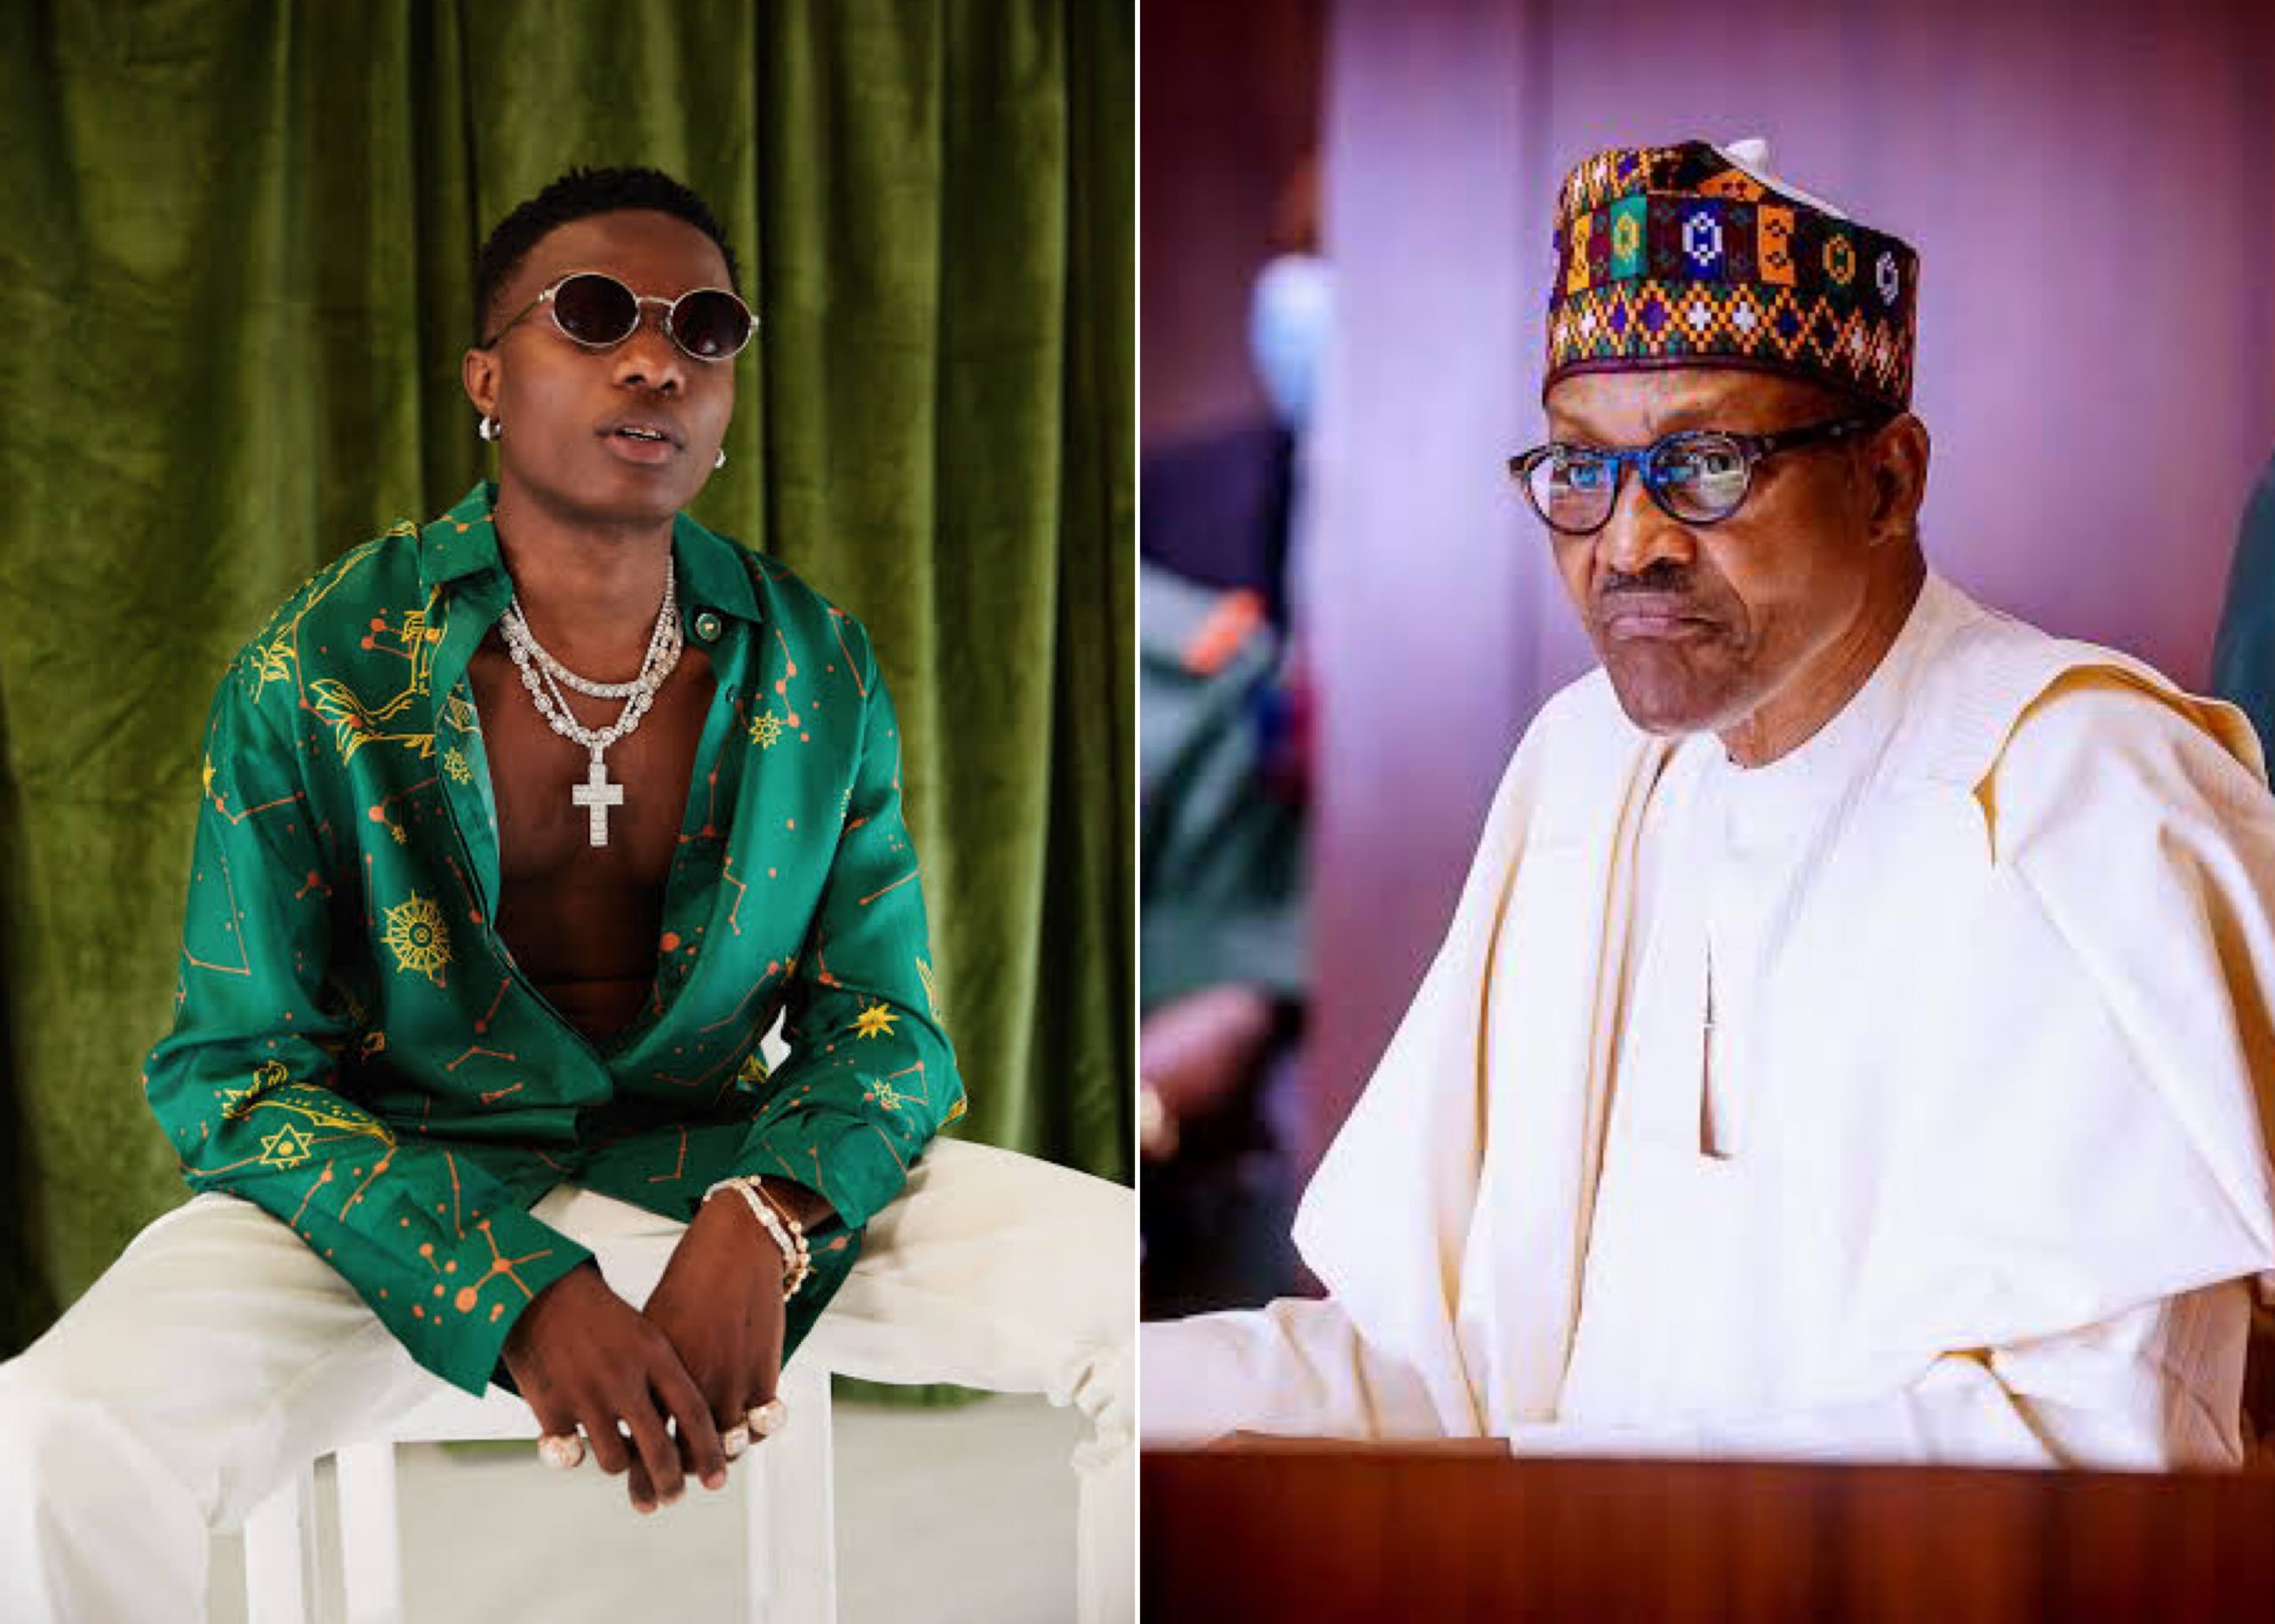 EndSARS: ‘Trump Isn’t Your Business, Face Your Country‘ – Wizkid Blasts Buhari As Celebrities Speak Against Police Brutality, Extra-Judicial Killings